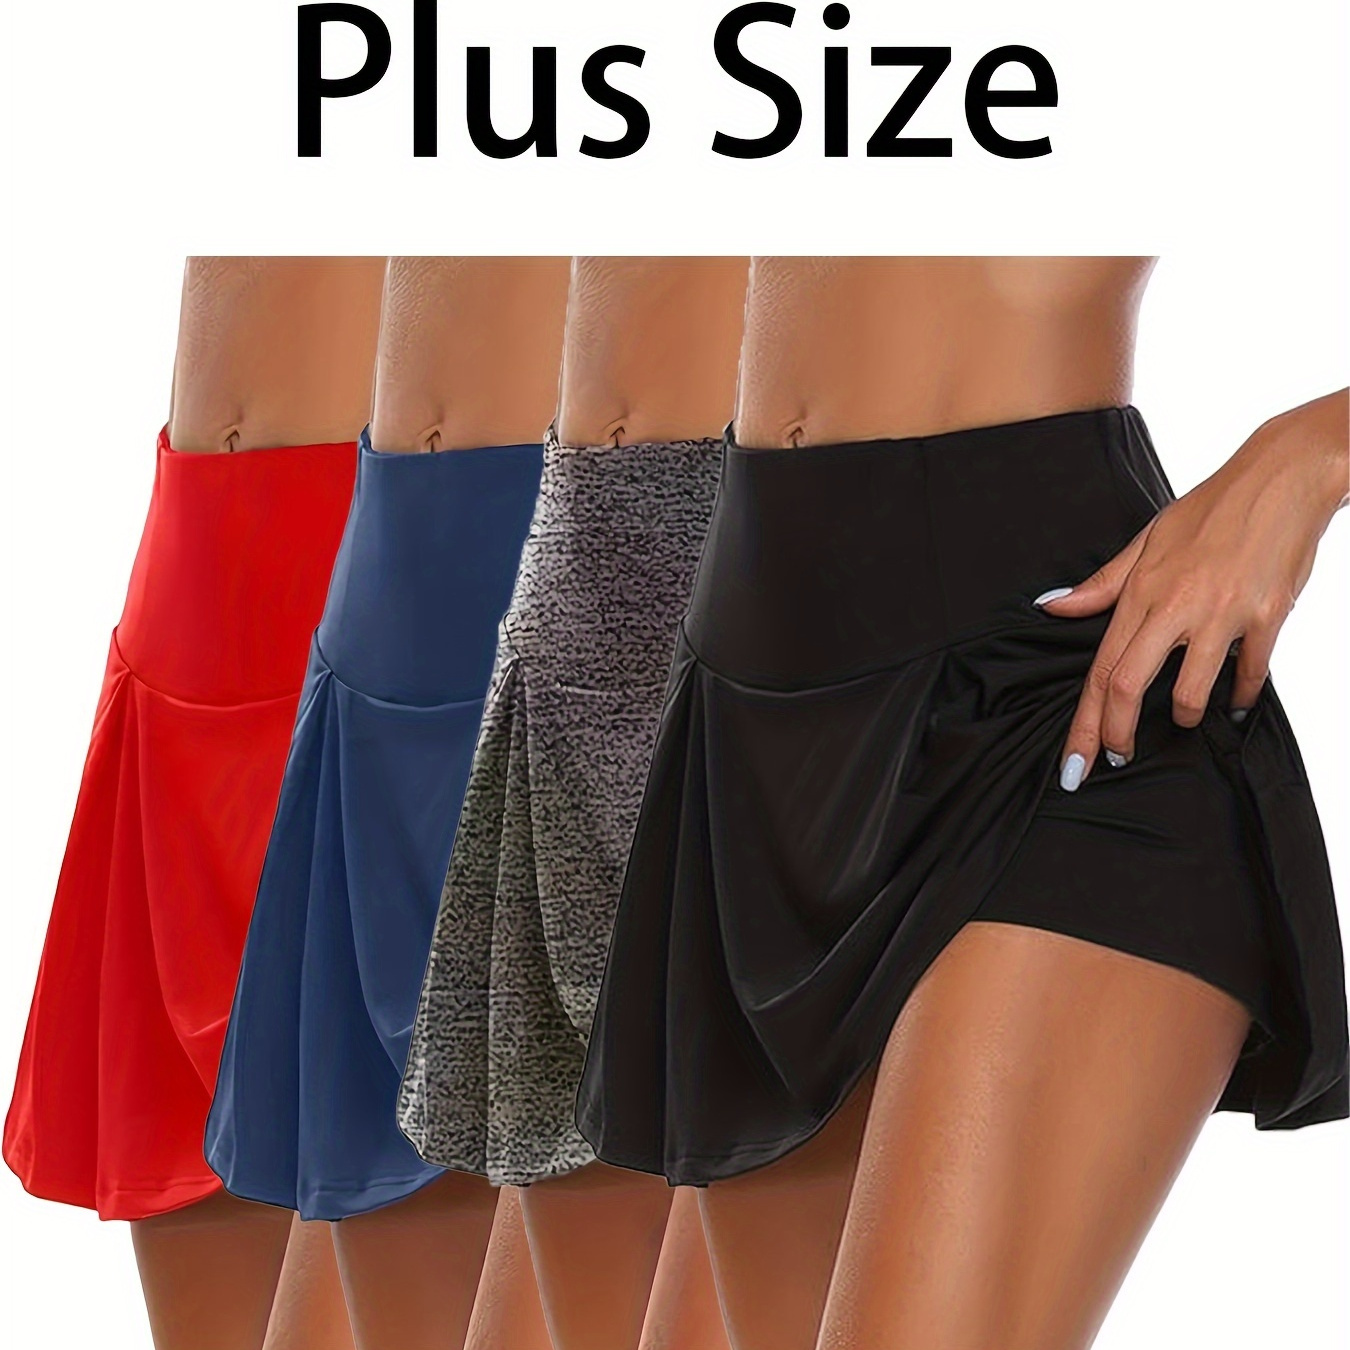 

Plus Size 4-piece Set Of Women's Running Skorts, Gym Yoga Exercise, Tennis Skirt, Sports Short Skirt, Cute And Fashionable Clothing, Summer